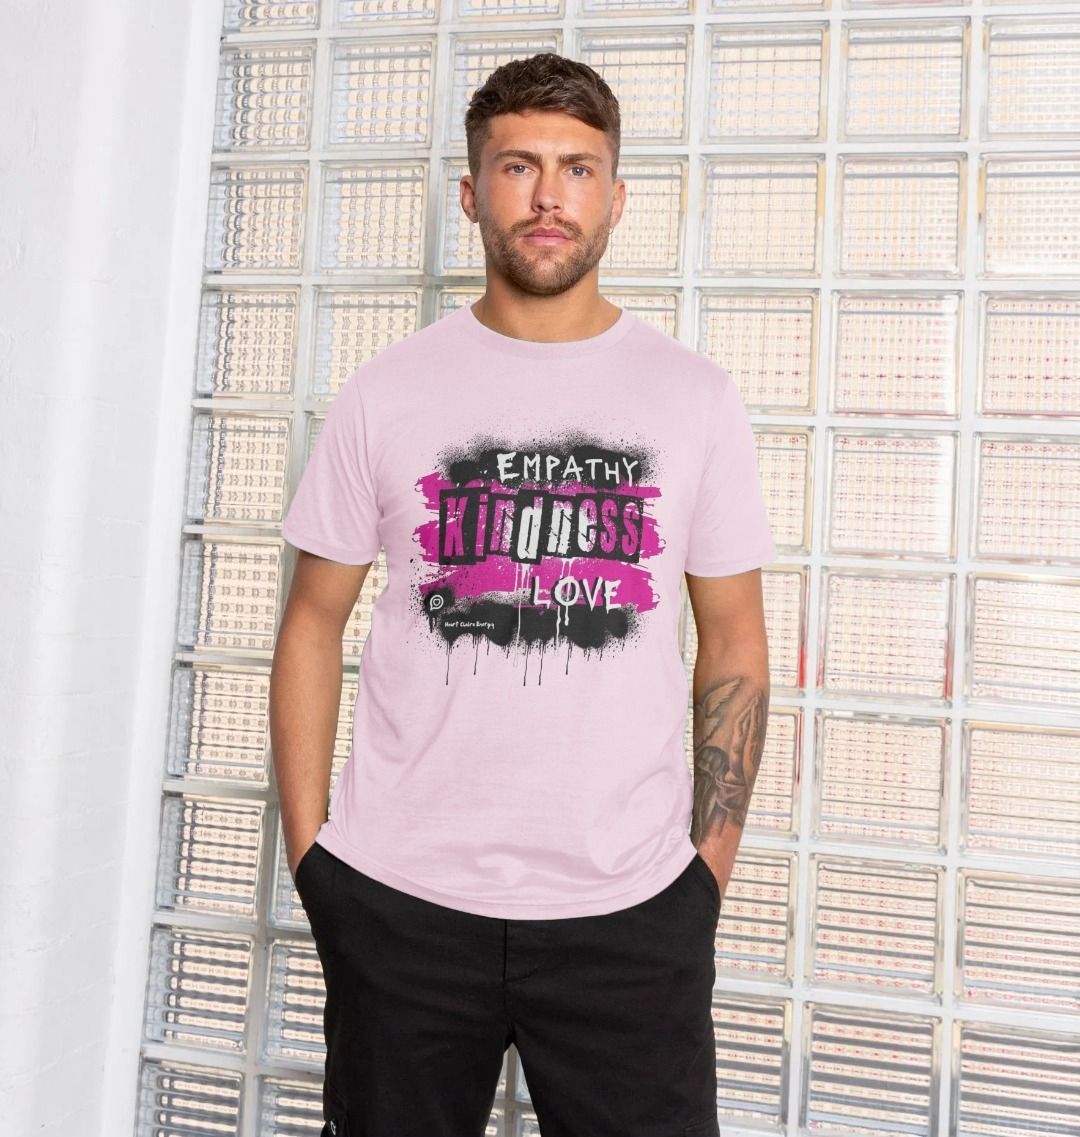 Male model wears baby pink t-shirt with the bright pink design for the heart chakra energy t-shirt with the words - Empathy, Kindness, Love to the front in a bold grafitti style font.